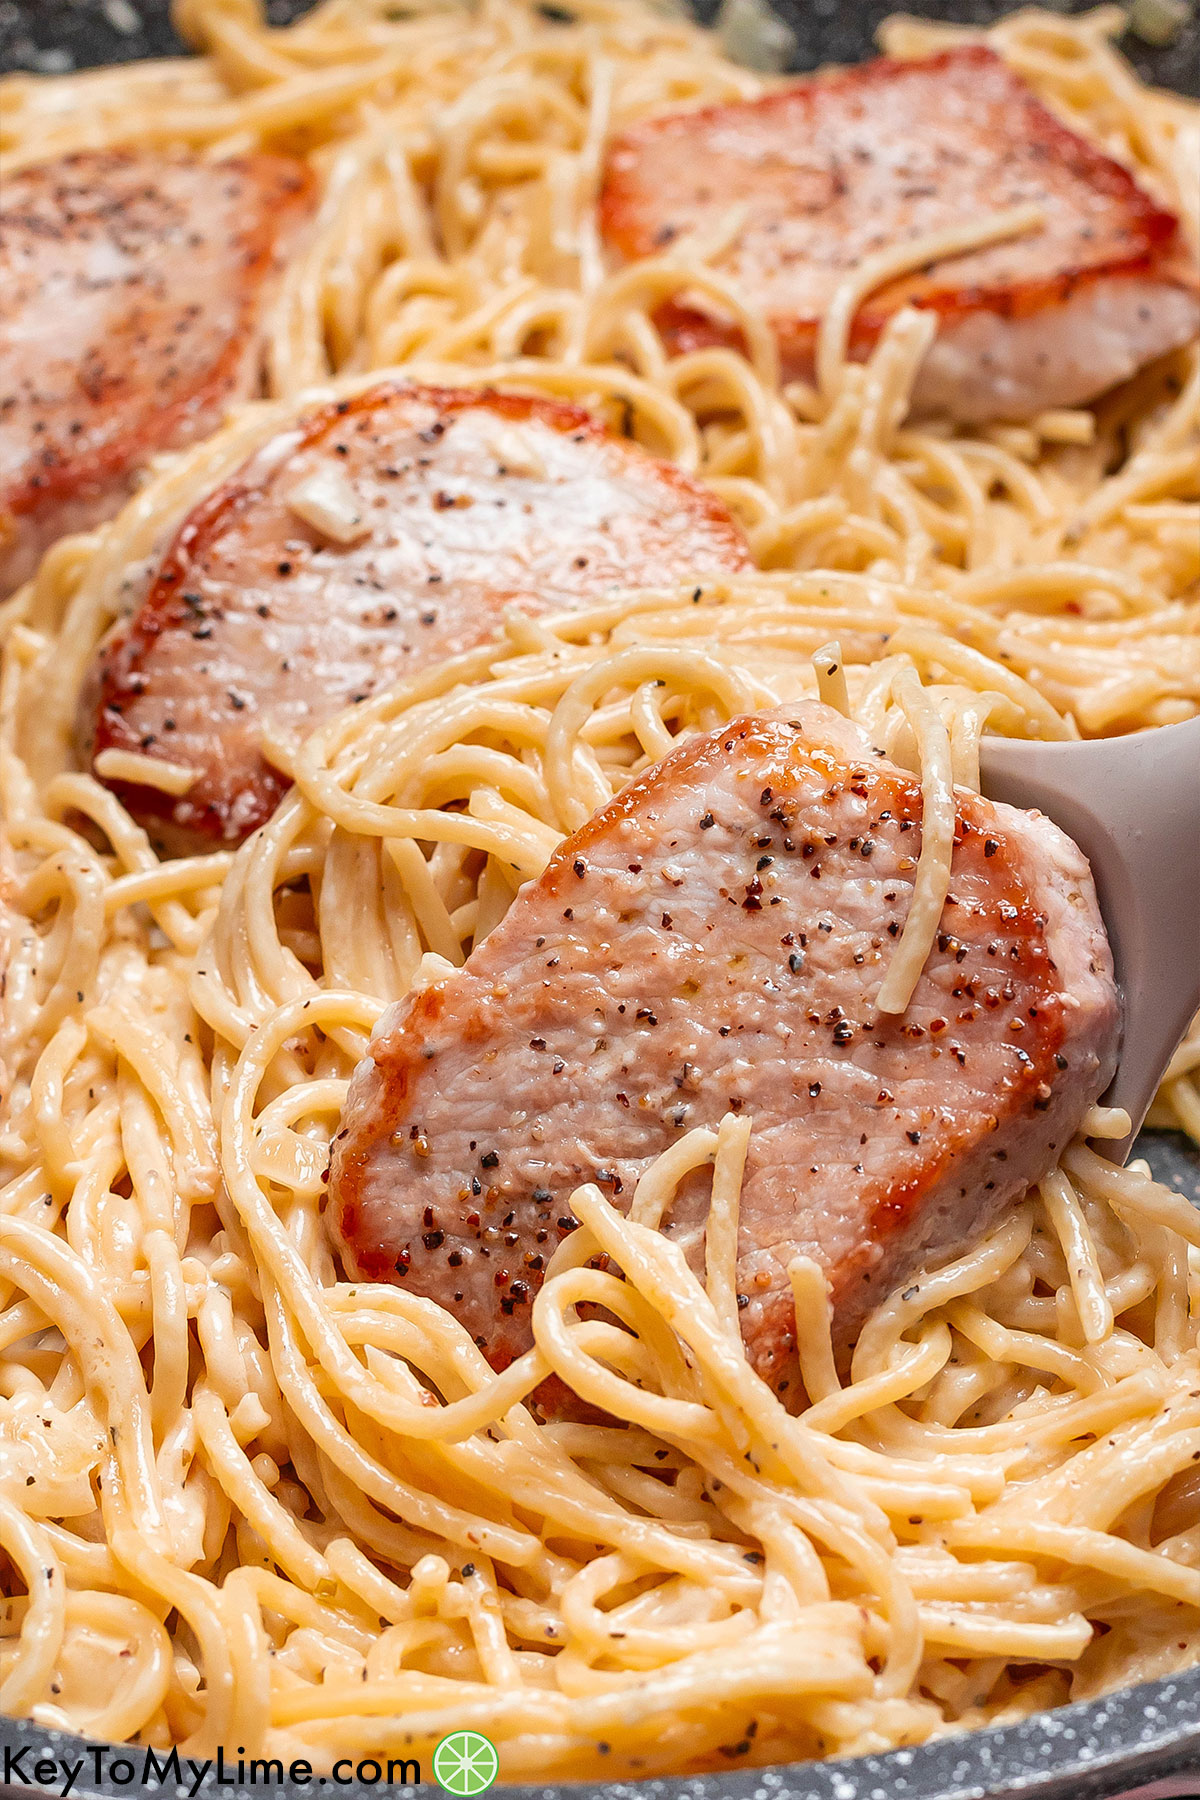 Scooping pork pasta out of a large skillet showing the texture of the thin slices of pork.